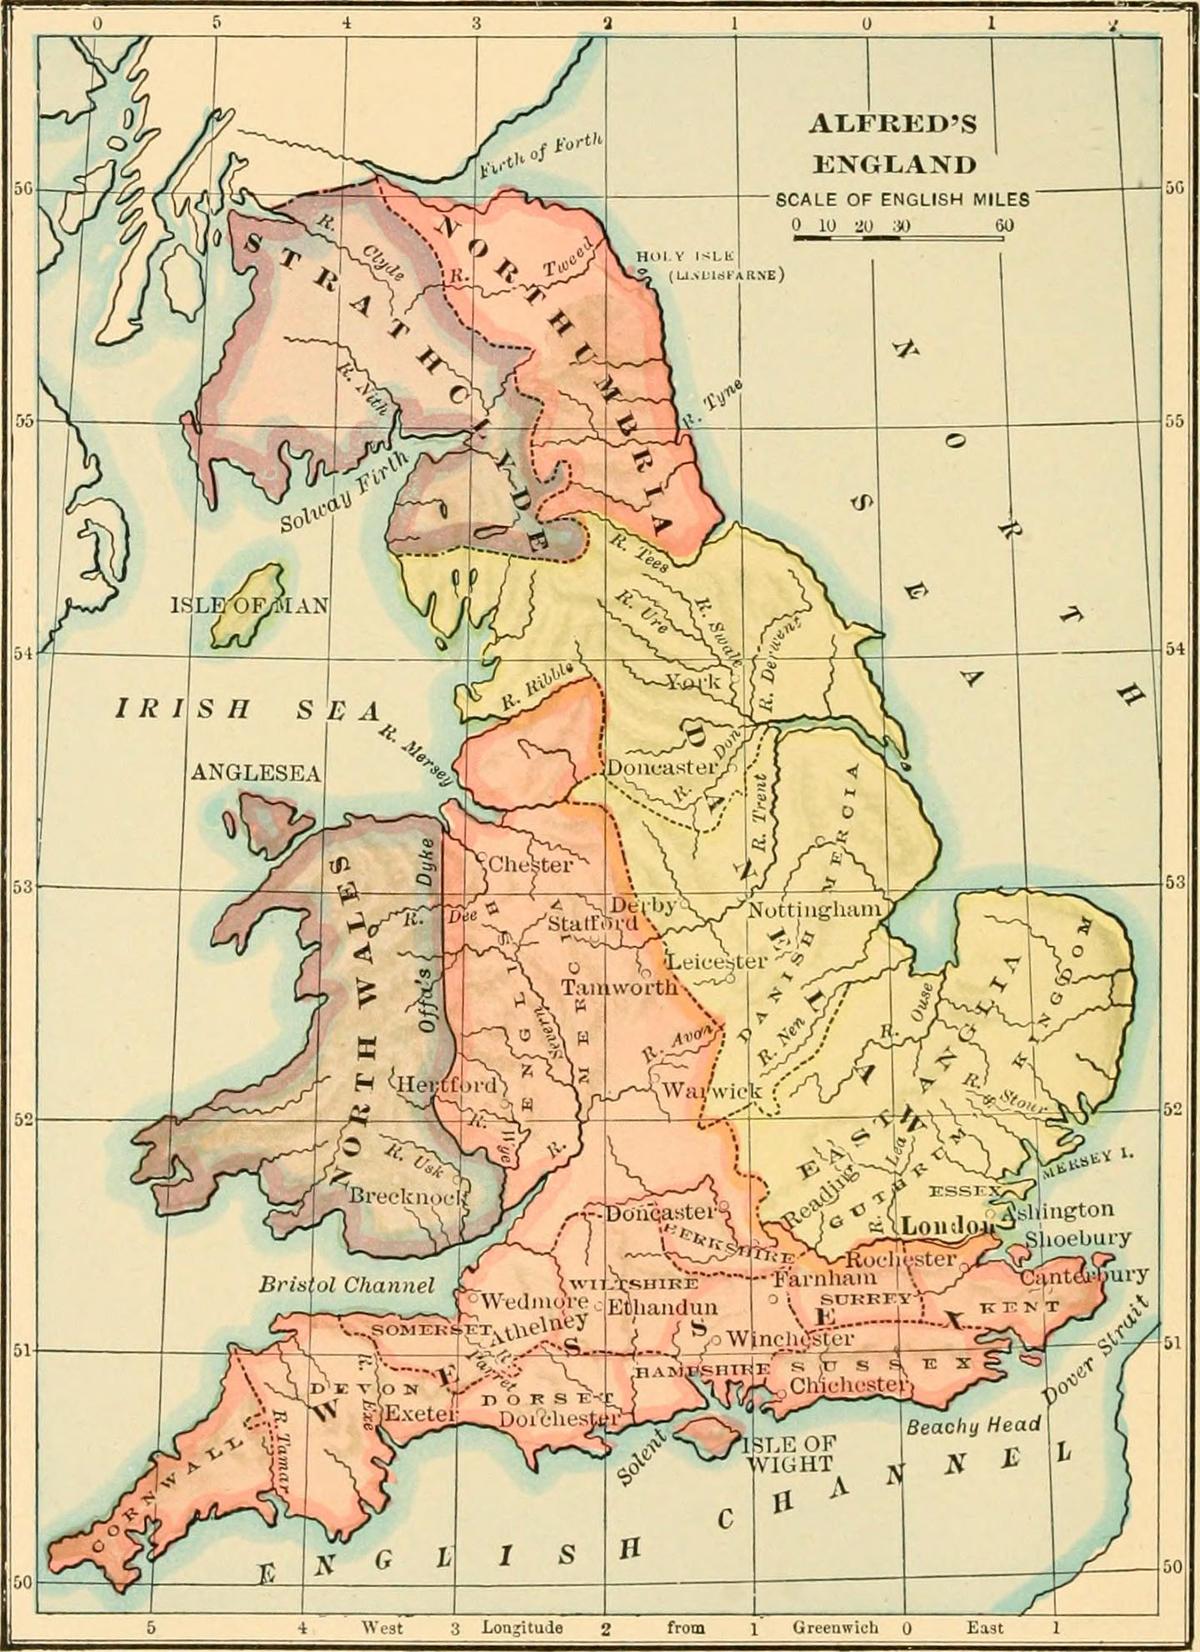 An illustrated plate from “The Dawn of American History in Europe,” 1912, by William Lewis Nida. (Public Domain) King Alfred’s England following the Treaty of Wedmore in 878. Before his death, Alfred the Great reigned over Wessex and Northumbria.